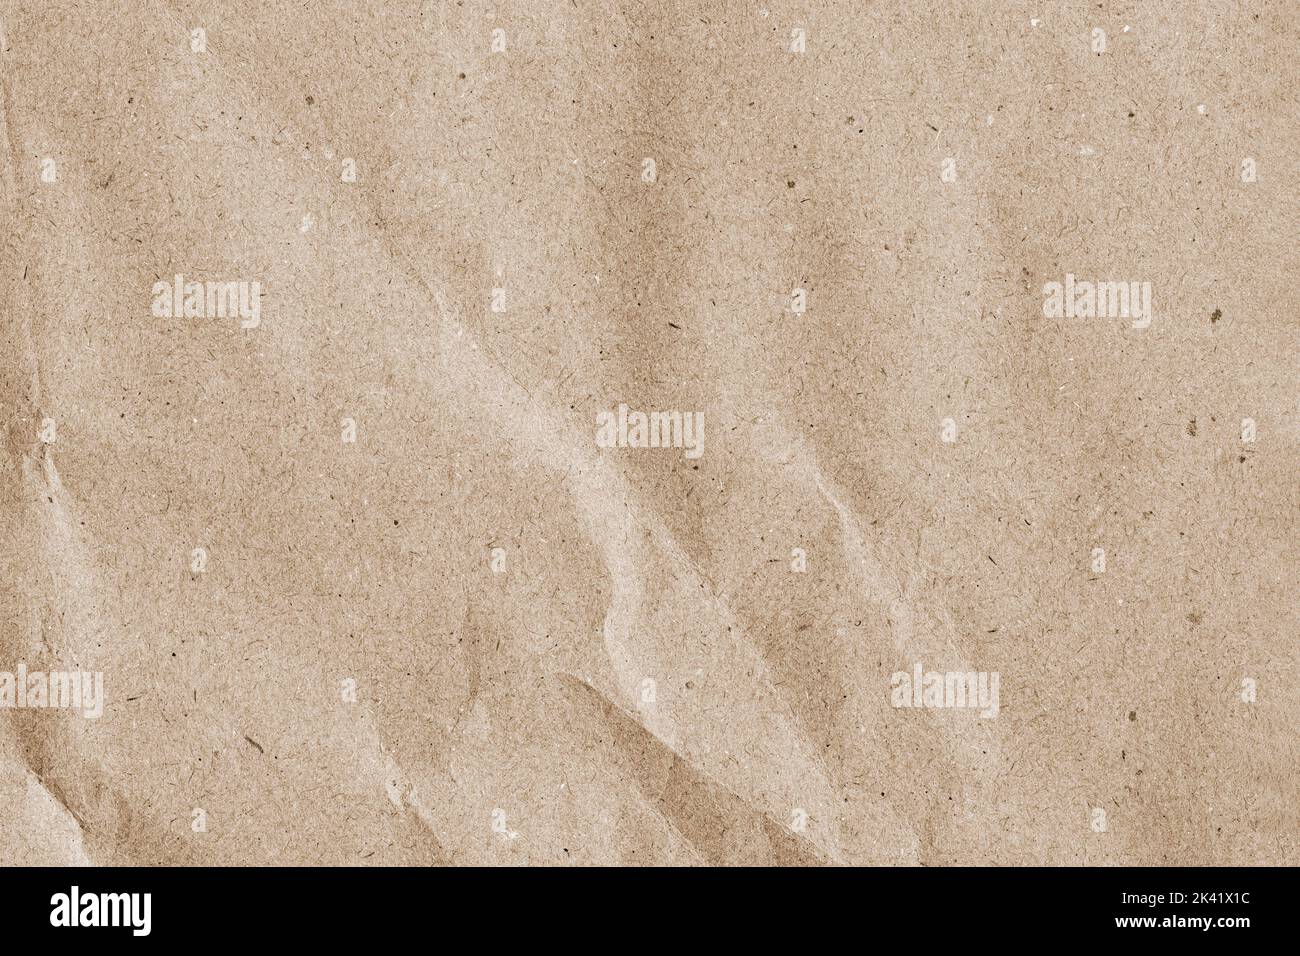 Natural background, texture of slightly crumpled kraft paper Stock Photo